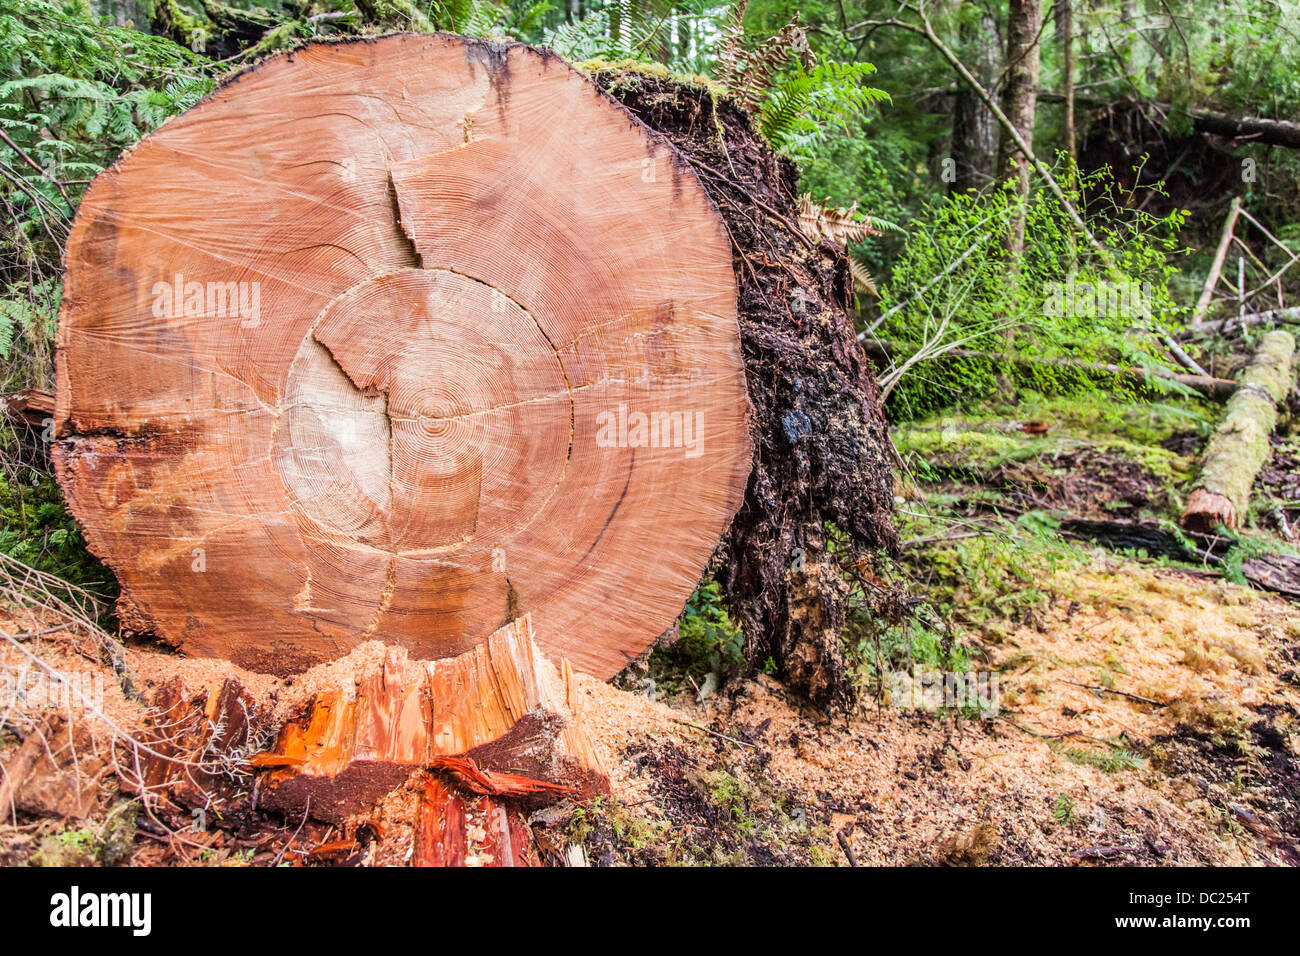 Old growth fir tree several hundred years old uncovered in the forest and cut open. Stock Photo